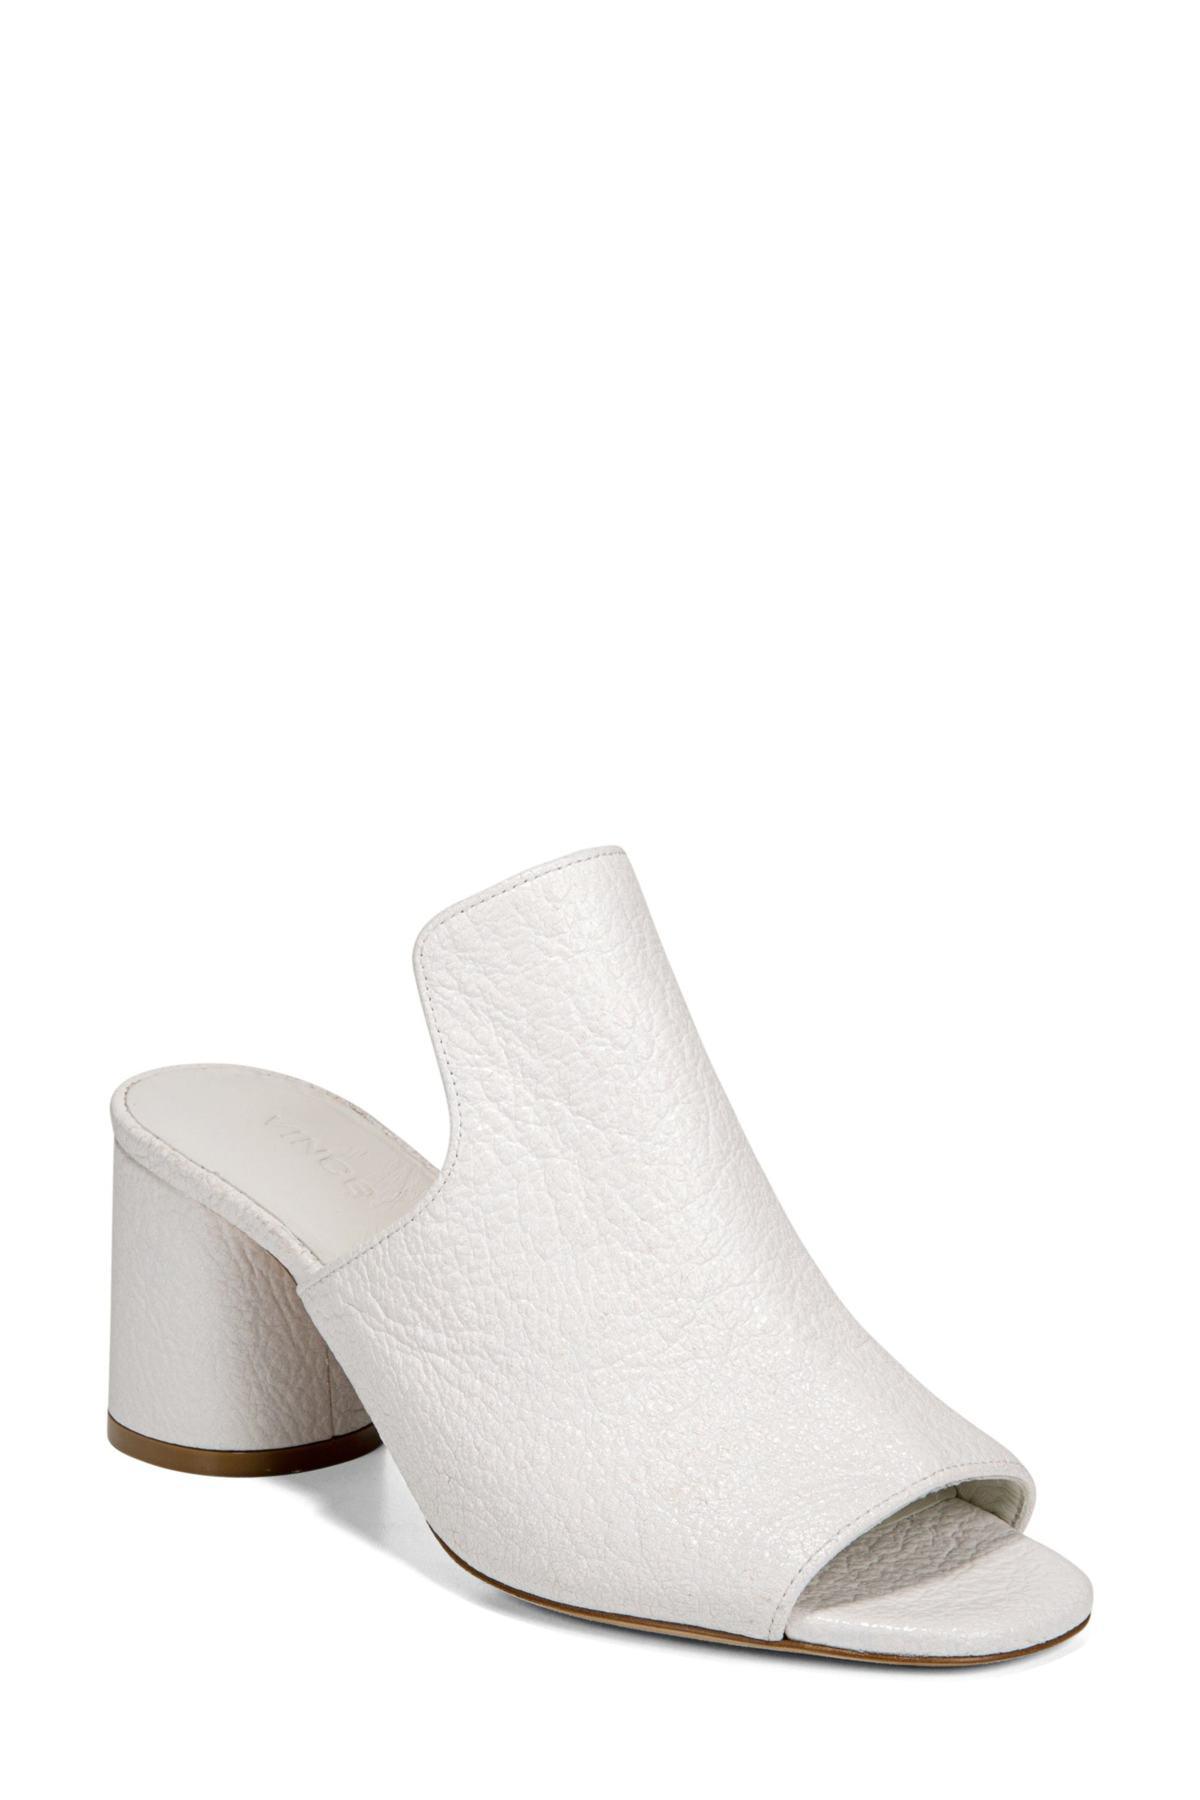 Vince Tanay Leather Mule in White - Lyst